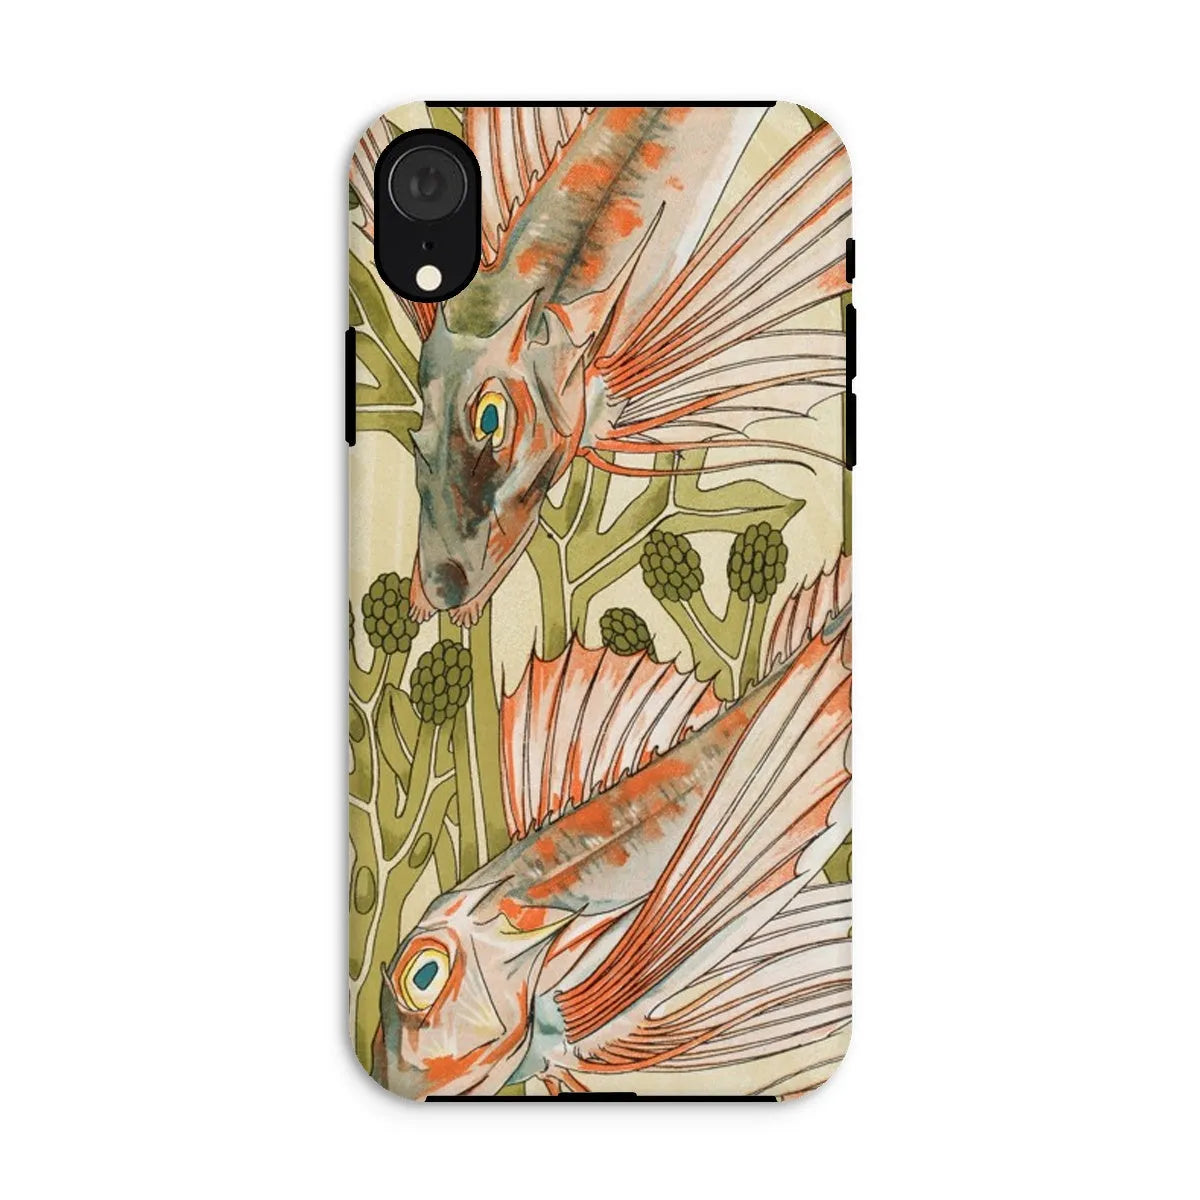 Red Fish - Animal Art Phone Case - Maurice Pillard Verneuil - Iphone Xr / Matte - Mobile Phone Cases - Aesthetic Art